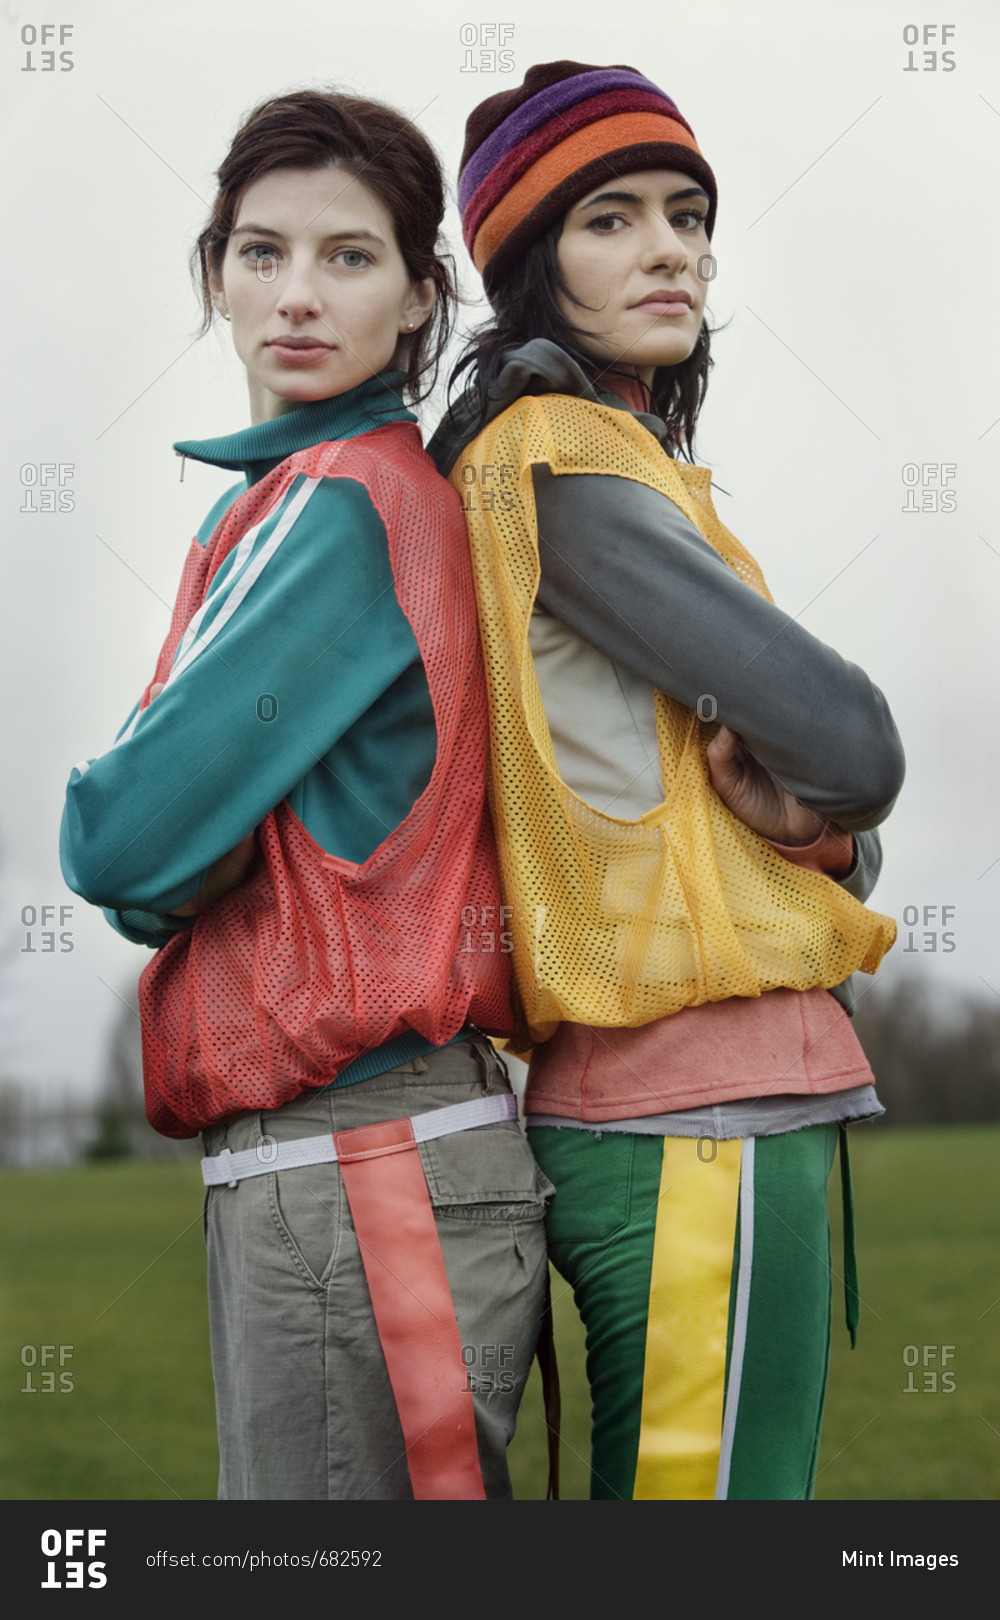 Portrait of two caucasian women who play sports outside in the winter.